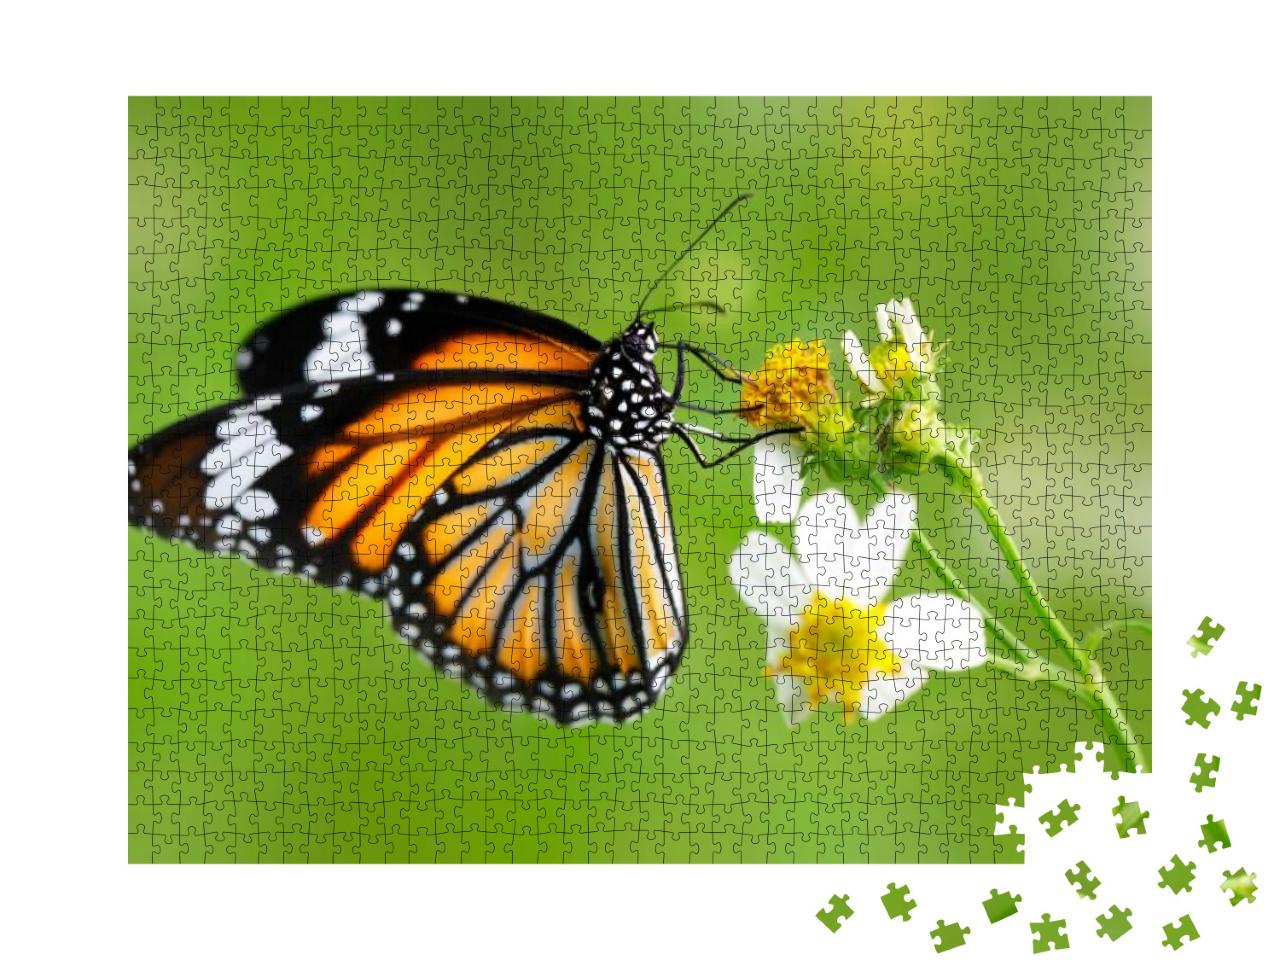 Closeup Butterfly on Flower Common Tiger Butterfly... Jigsaw Puzzle with 1000 pieces